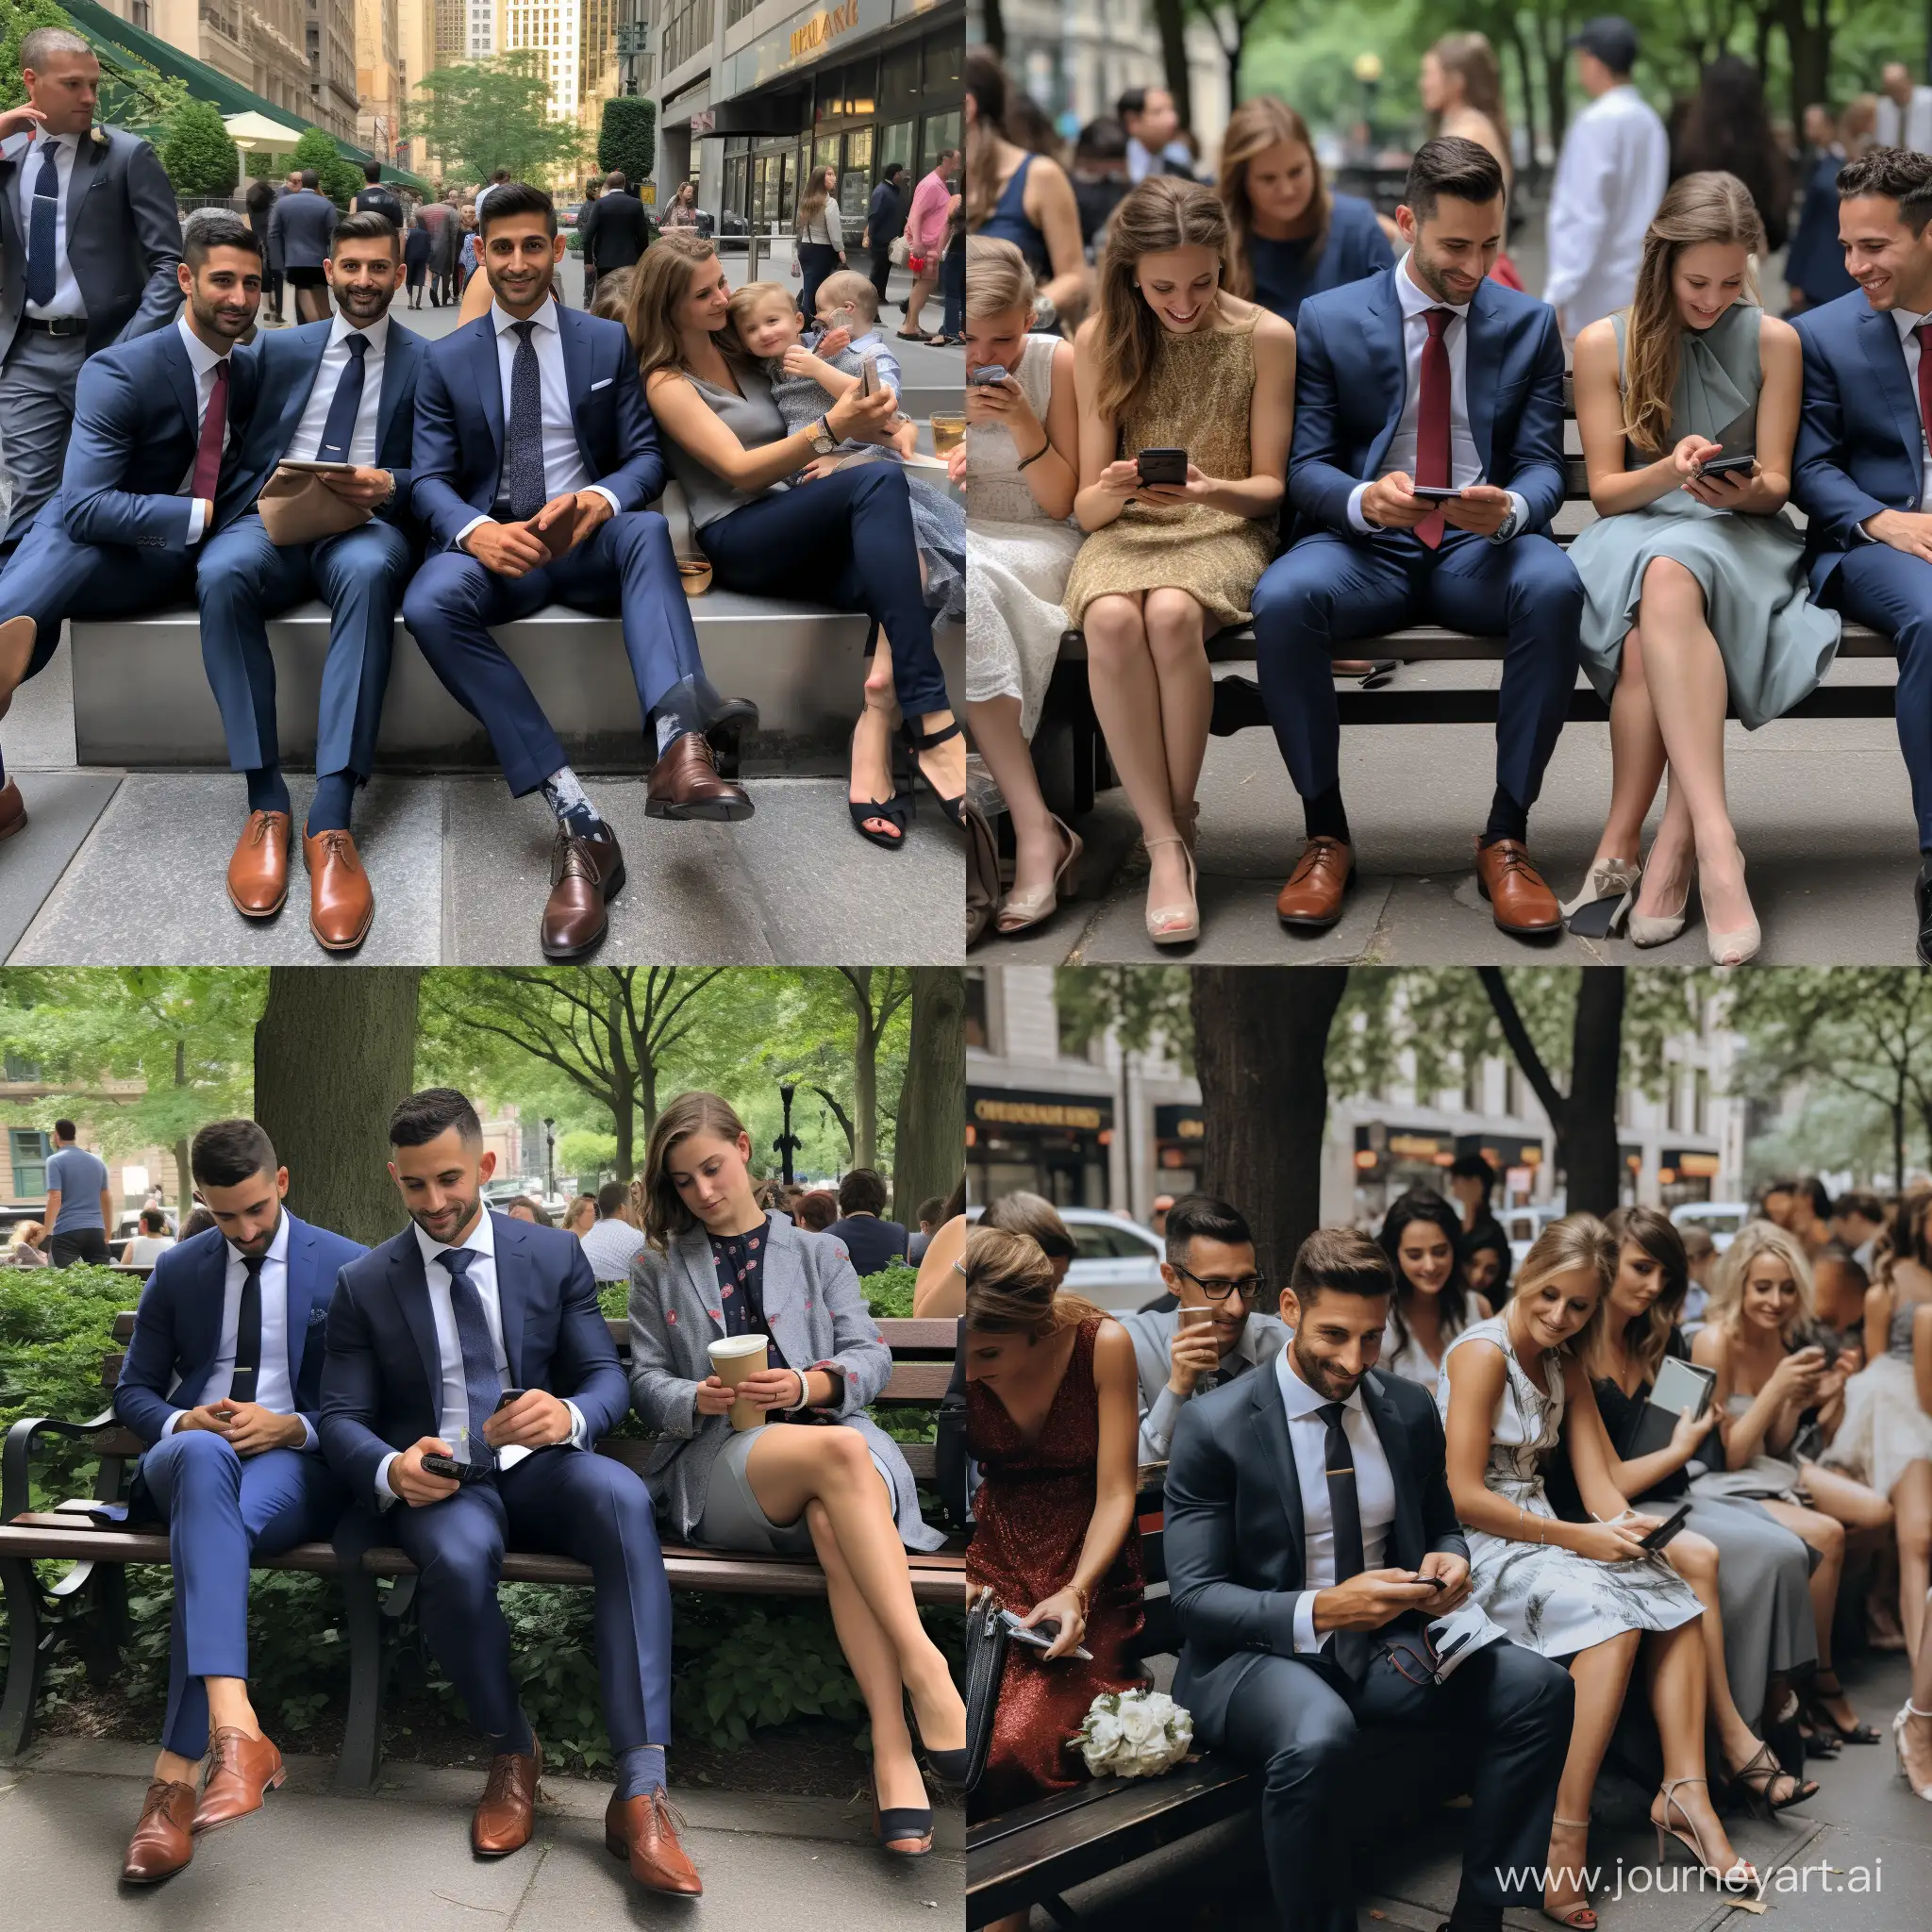 
phone photo of a man sitting on a bench with his family at a wedding in New York posted to reddit in 2019 --style raw